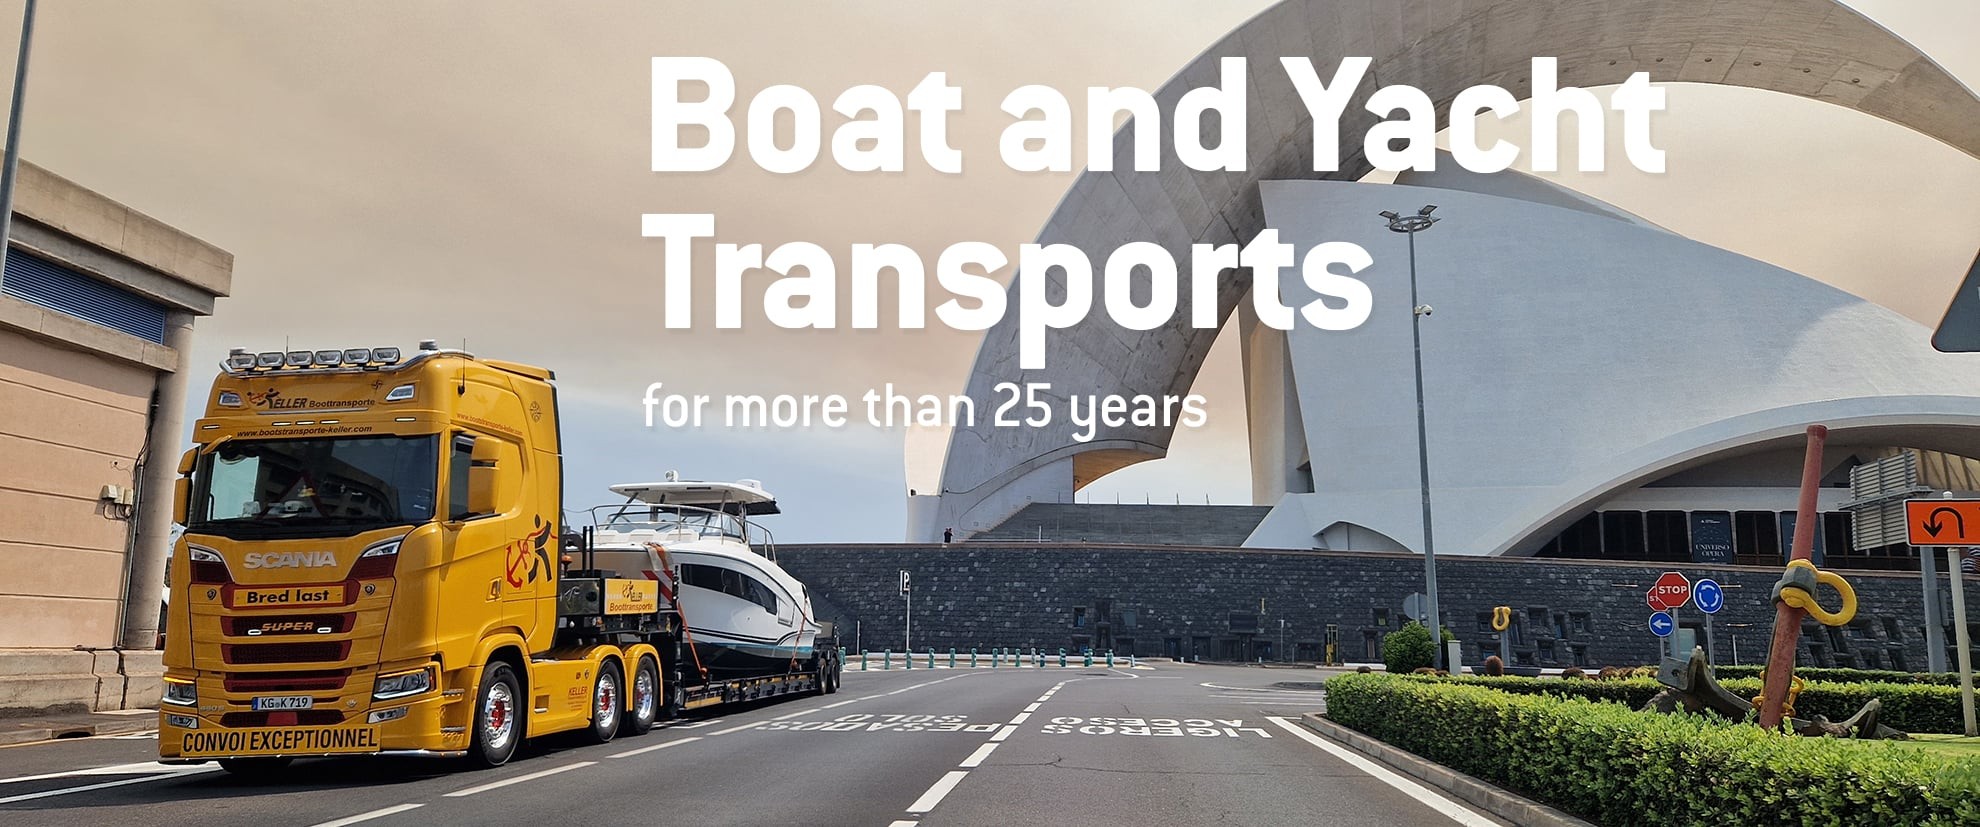 Boat and yacht transport on land and water